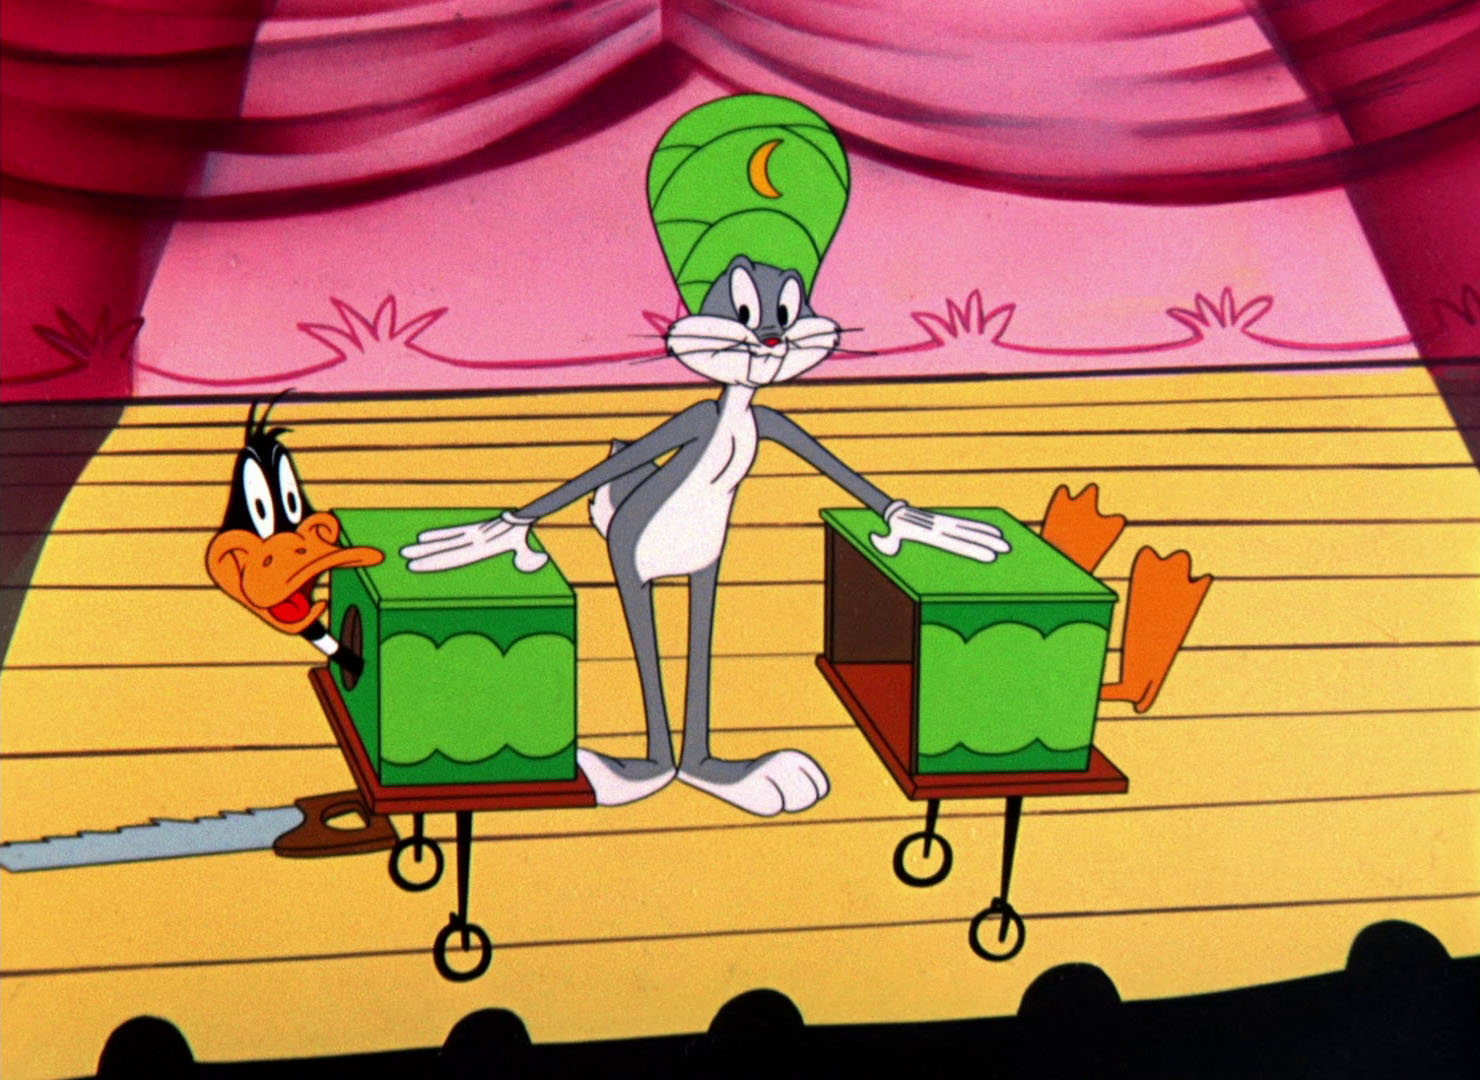 Full tunes. Thats all Folks Bugs Bunny. Show biz Bugs - Tea for two.